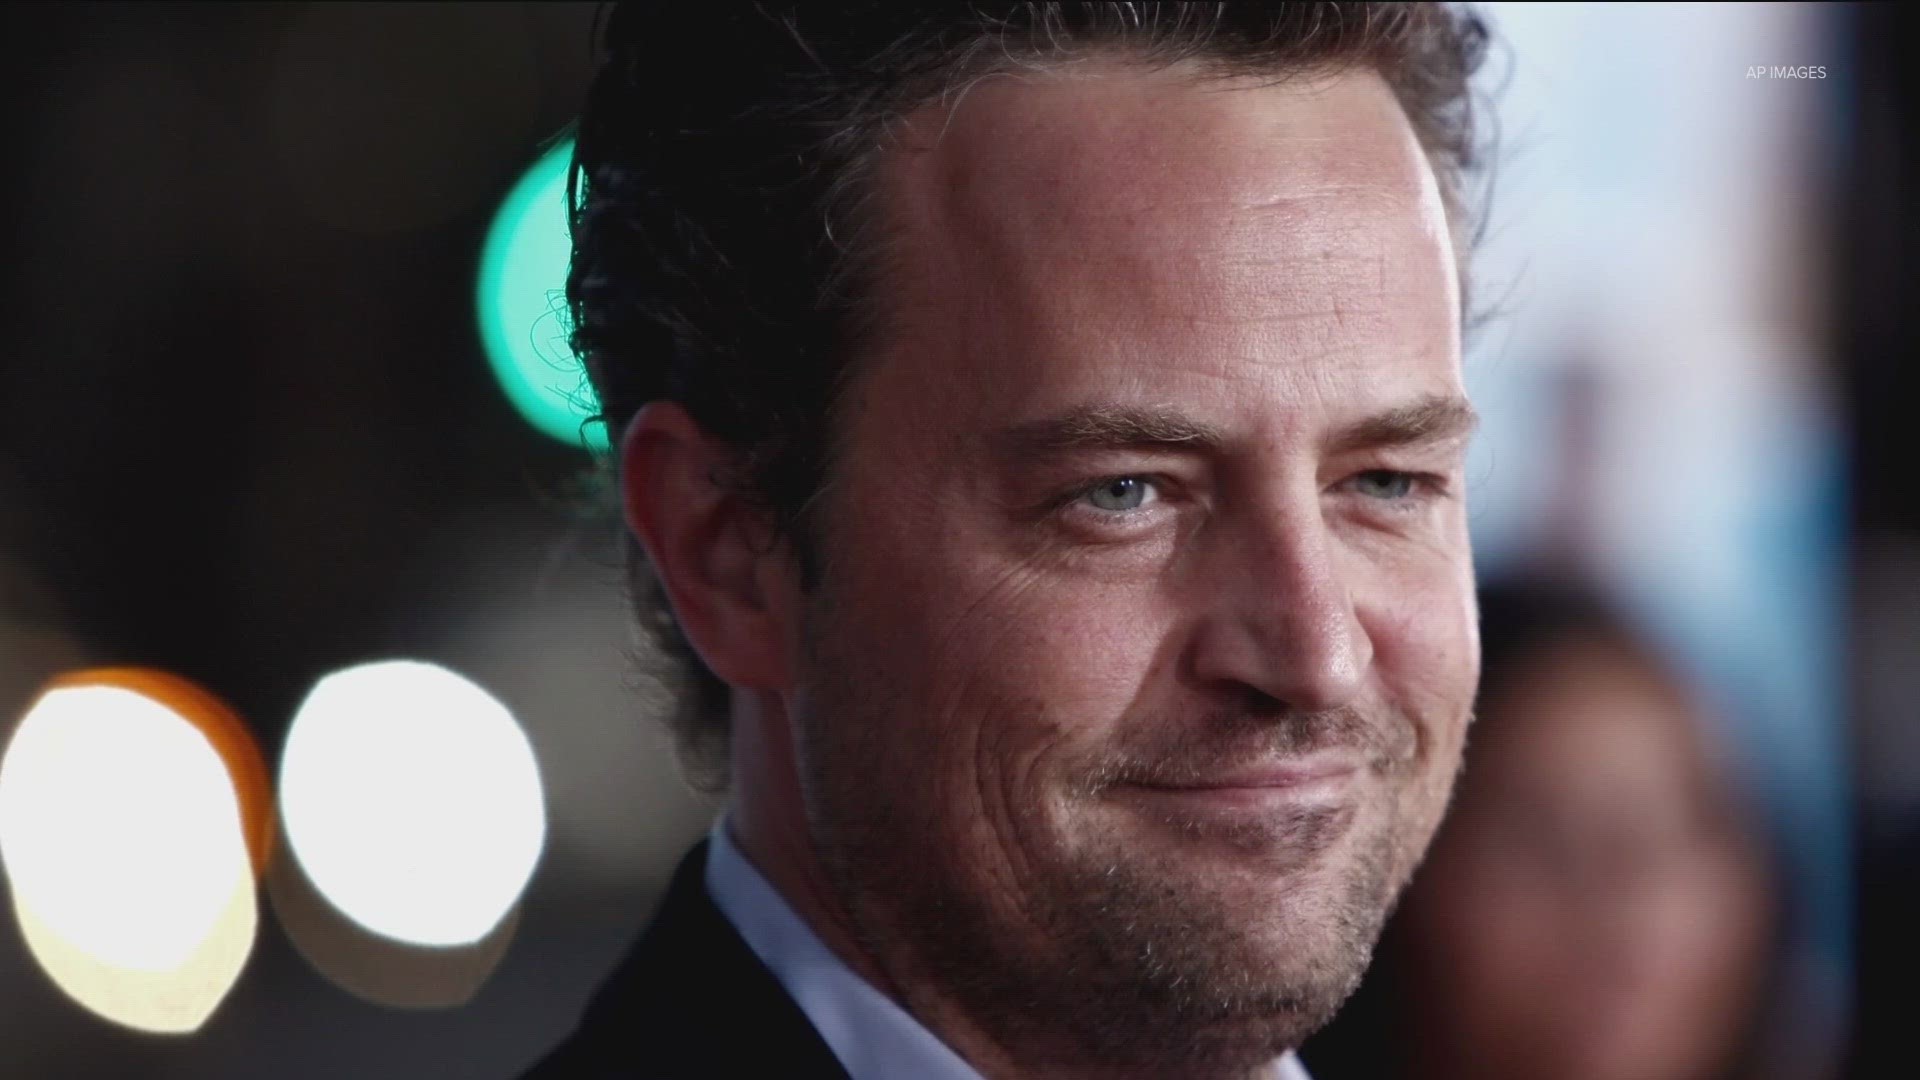 The cause of death has been revealed for 'Friends' star Matthew Perry. He was declared dead after being found unresponsive at his Los Angeles home.